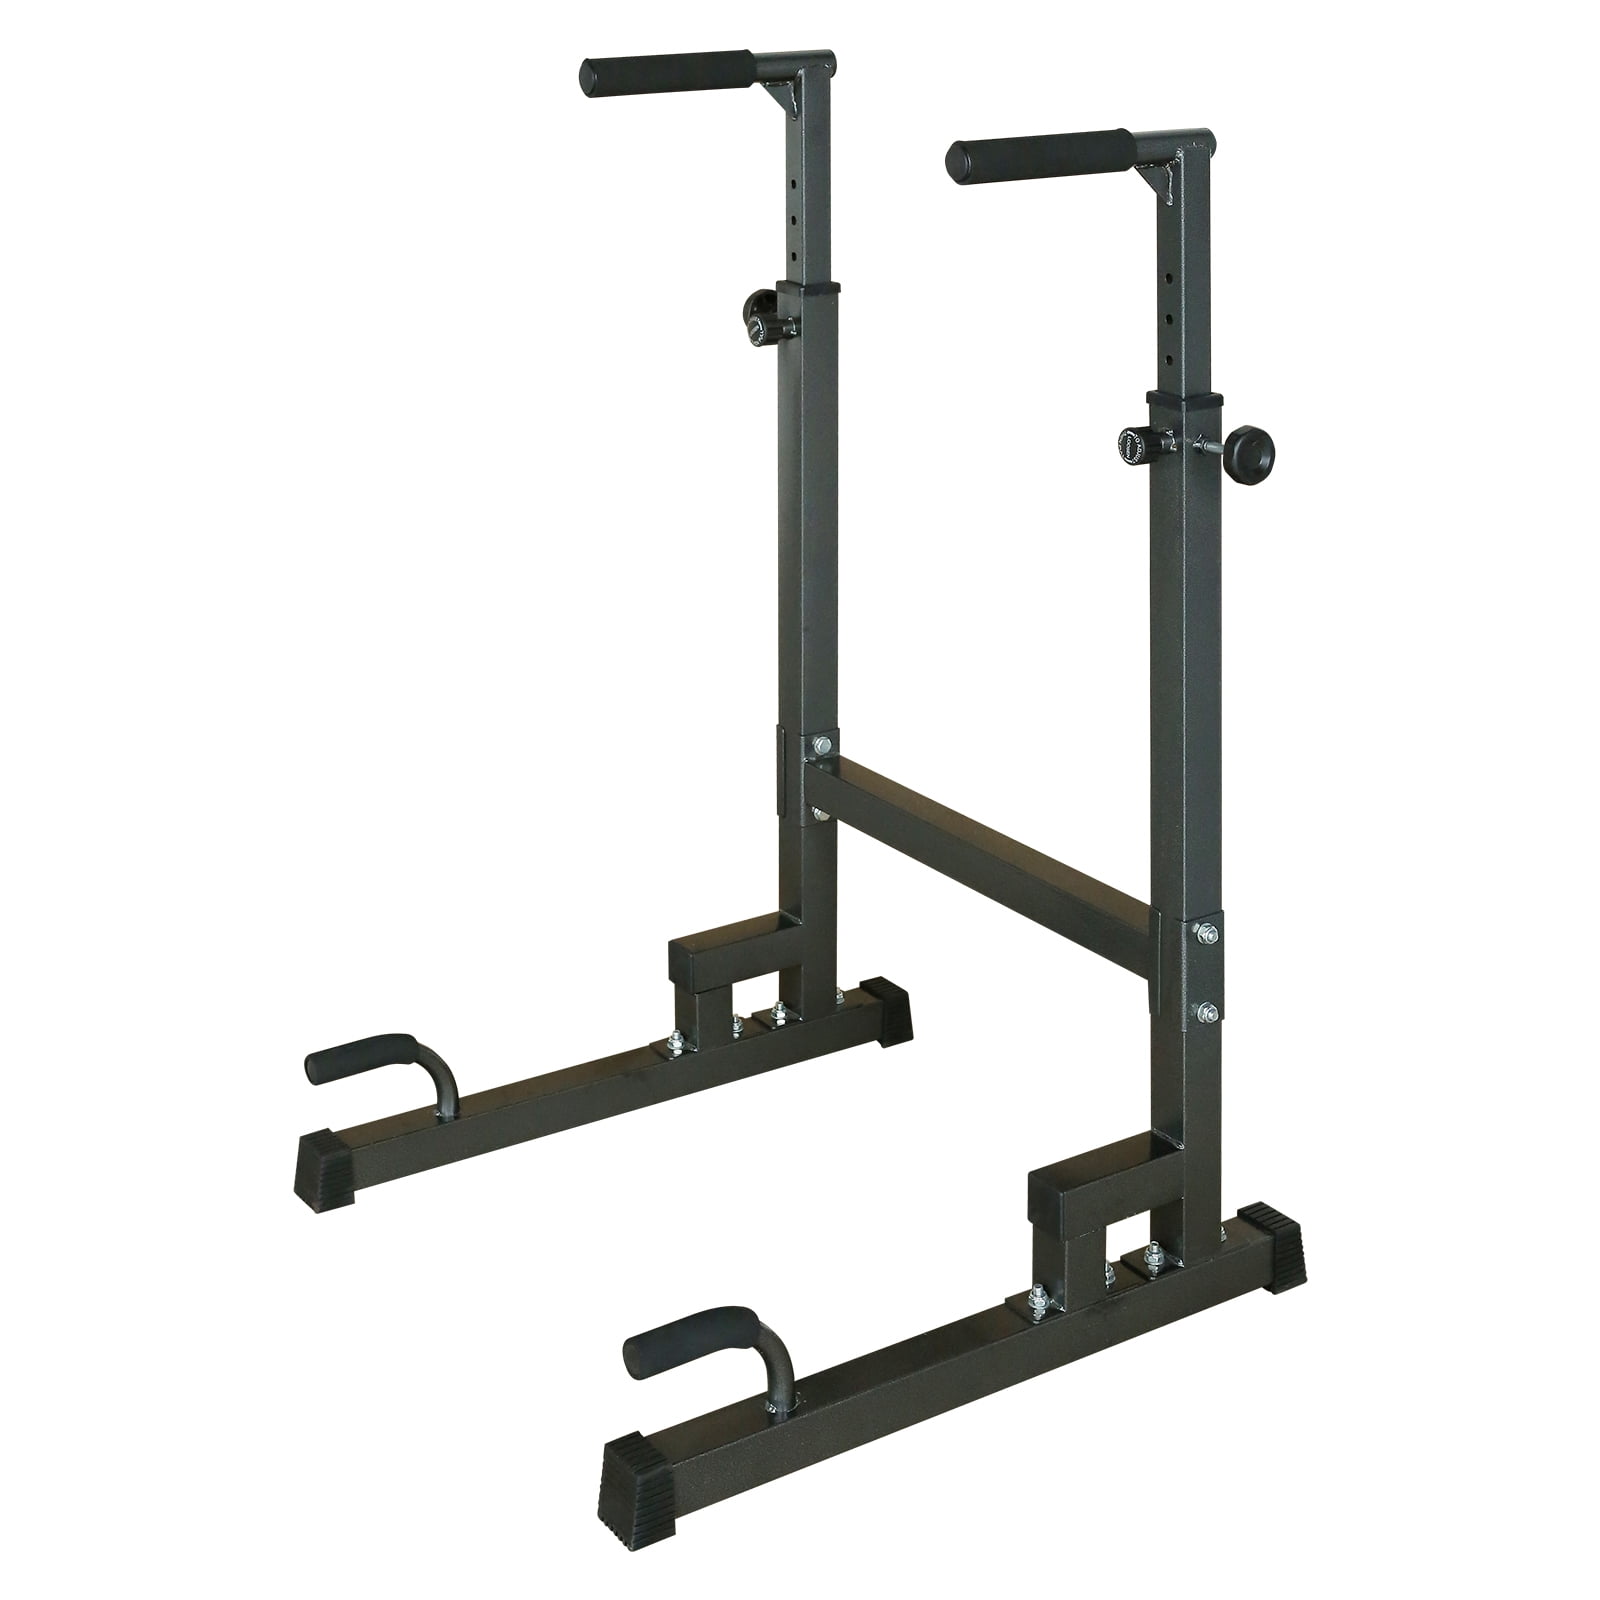 Yone jx je Power Tower Pull Up Bar Station, Free Standing Pull Up Rack ...